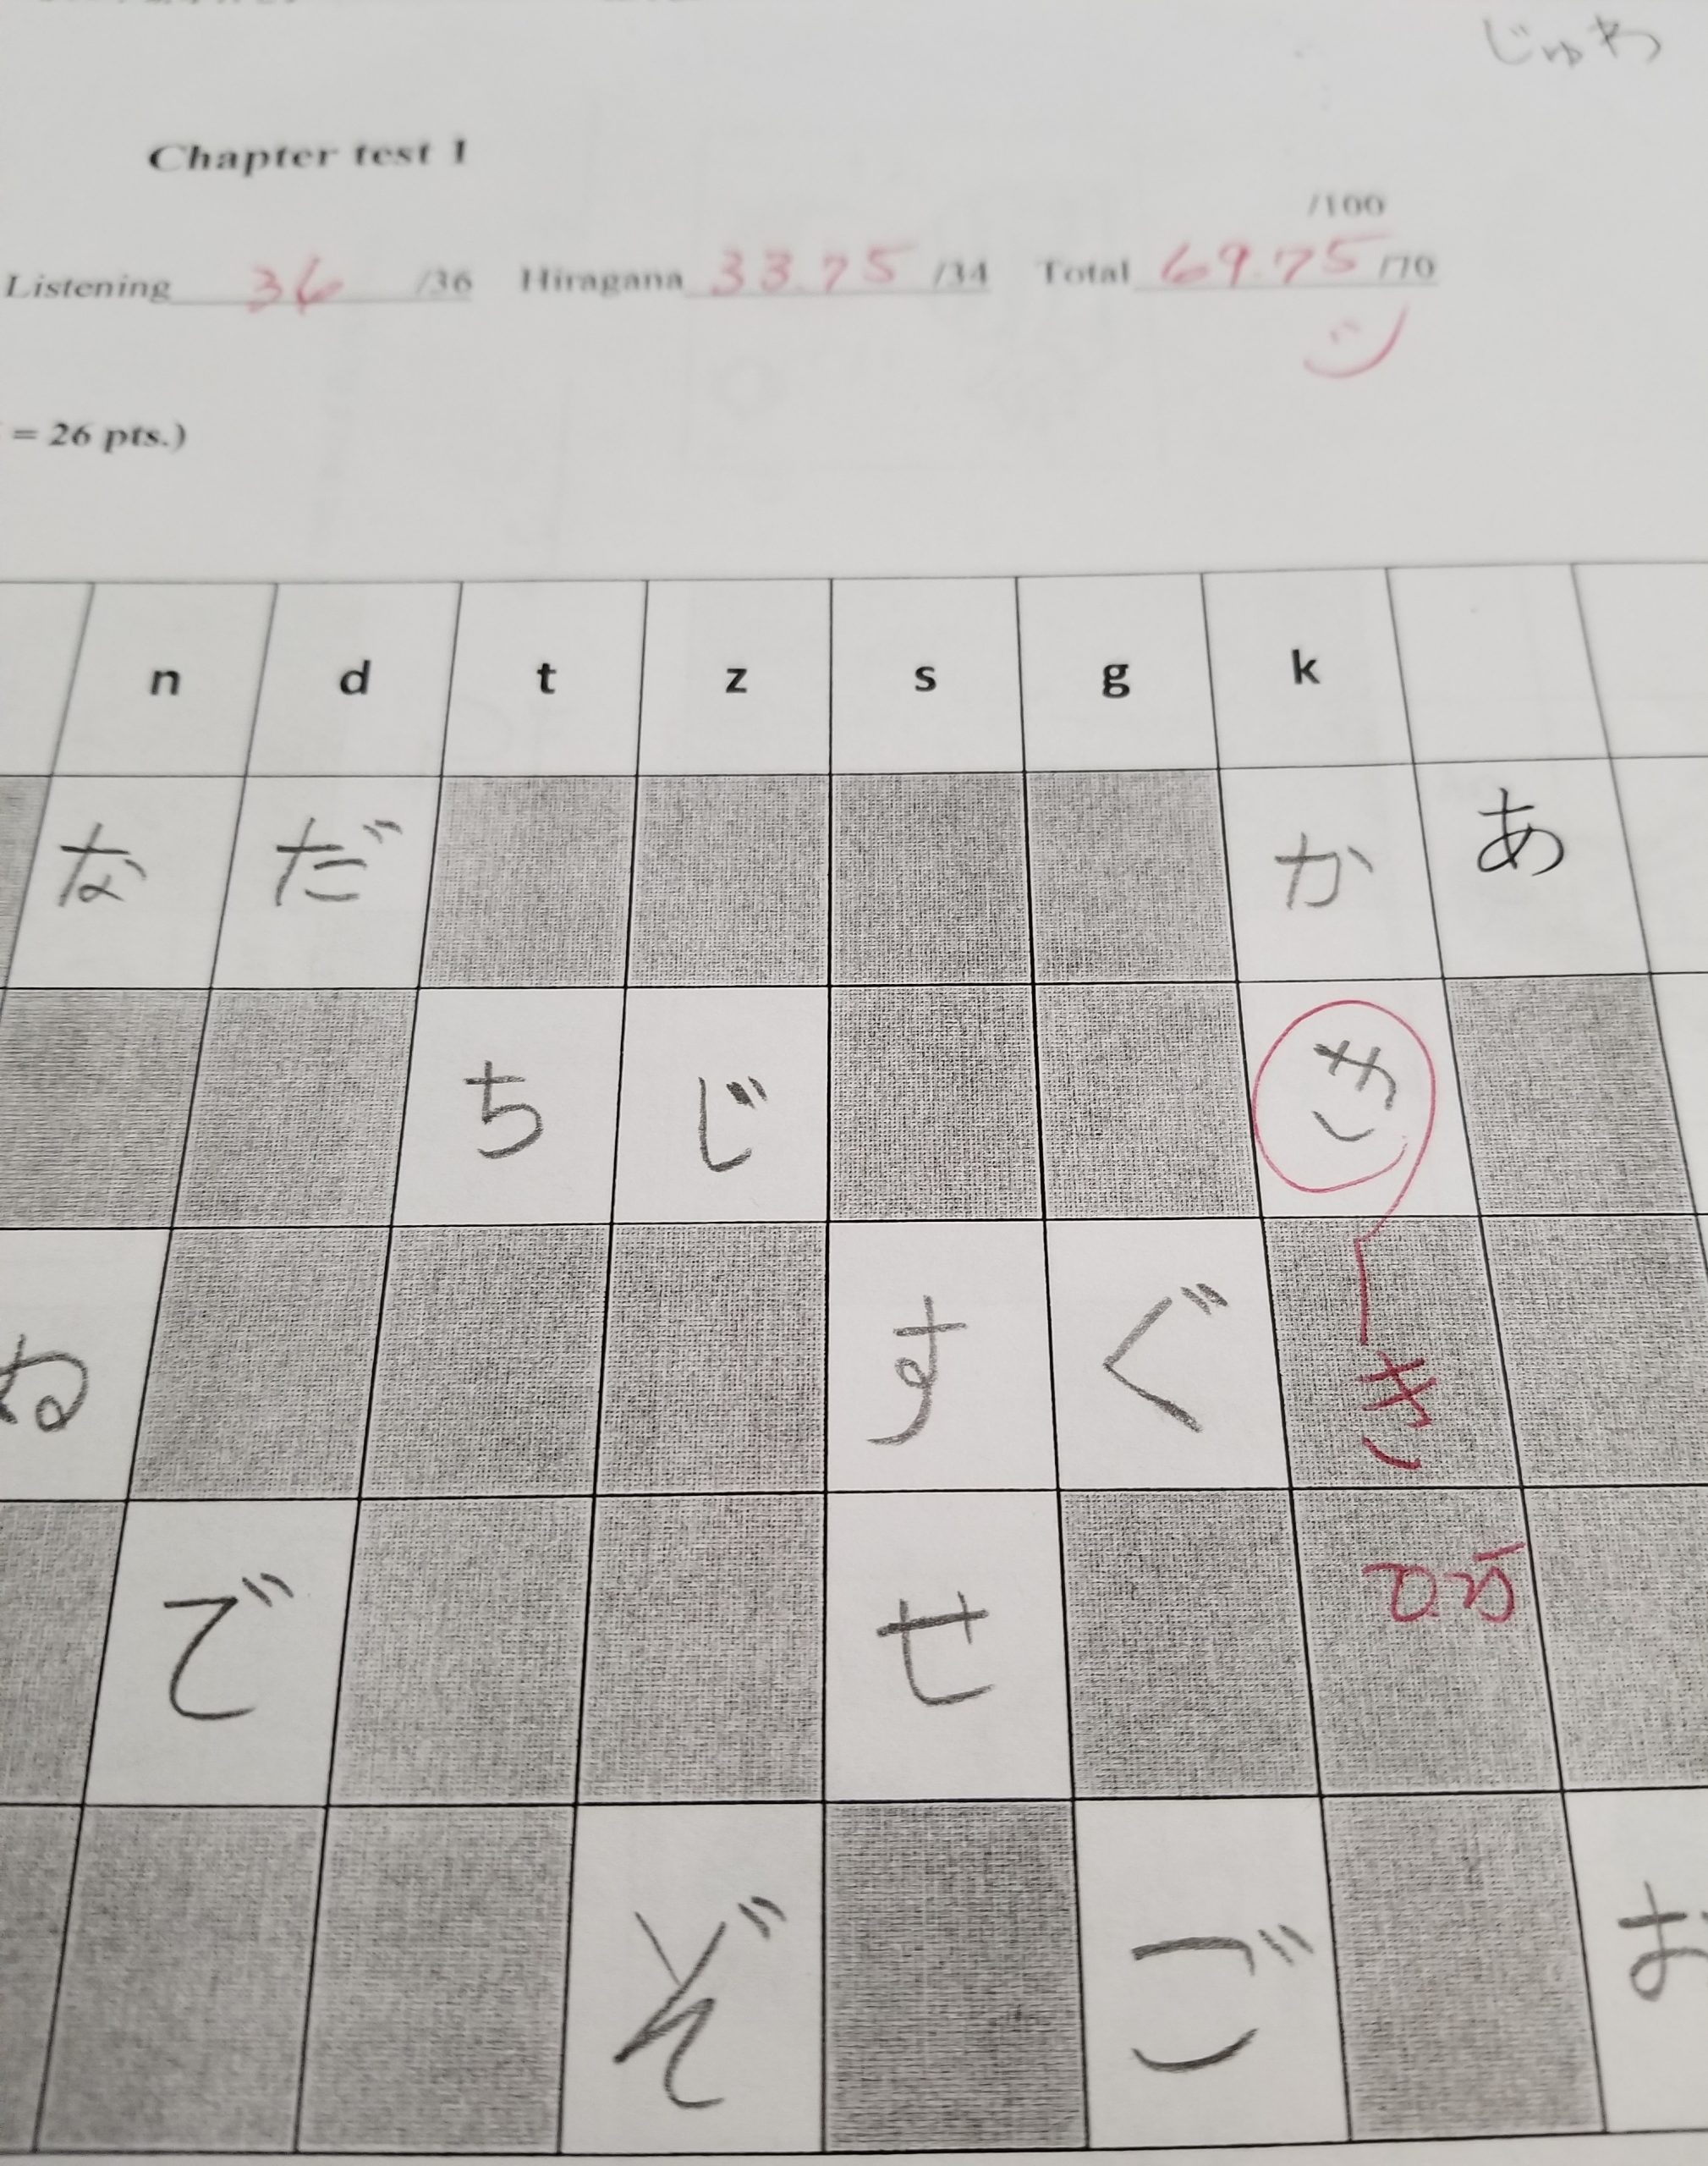 Auditing Japanese 101: Observing my foreign language teaching and learning